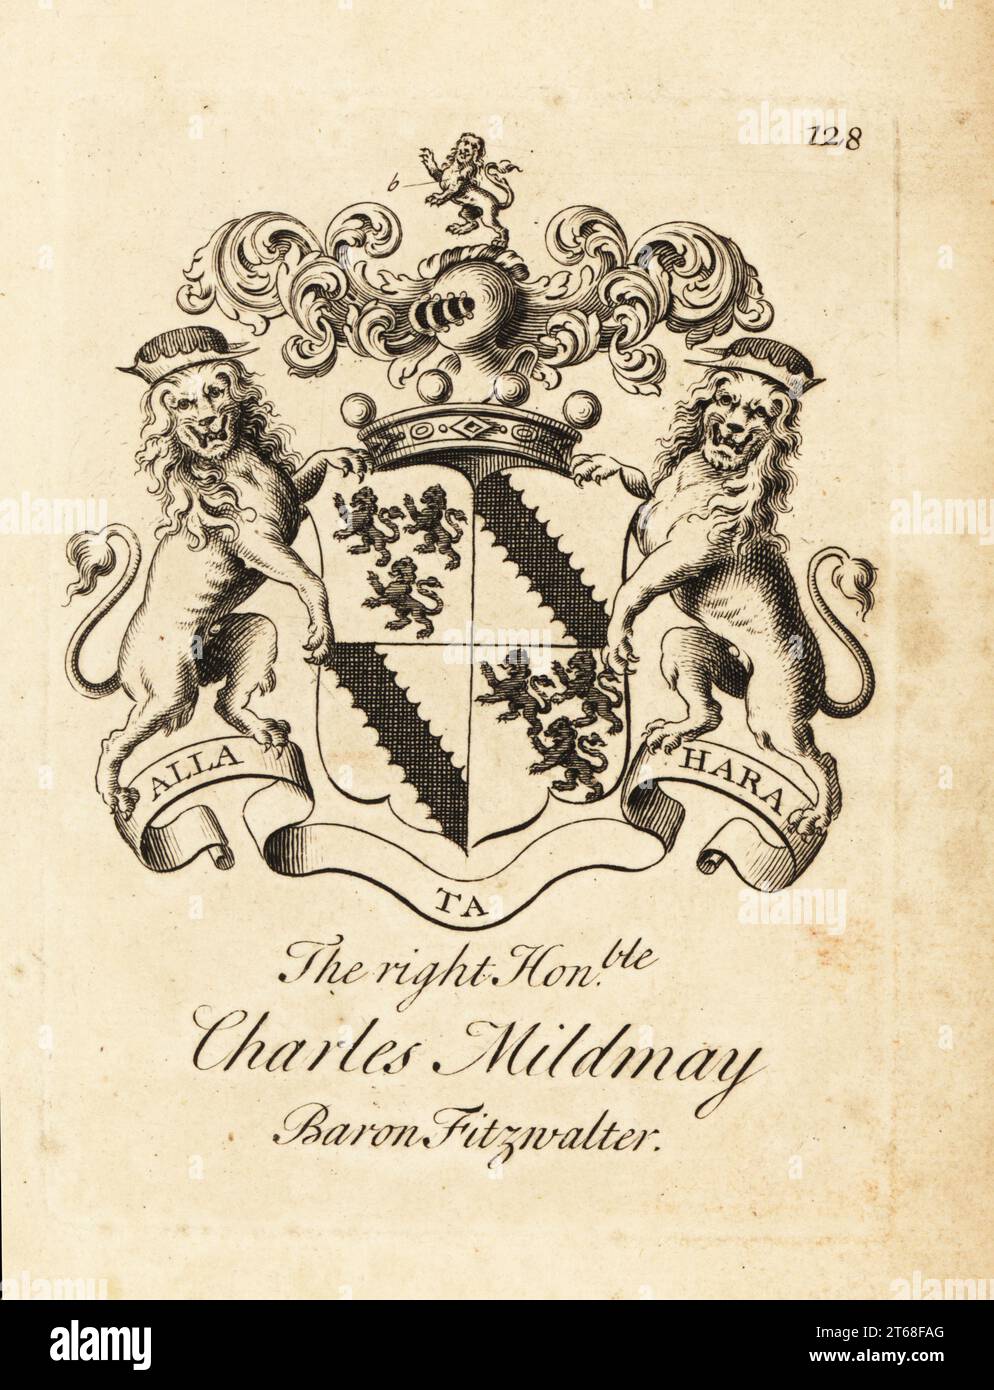 Armoiries du très honorable Charles Mildmay, 18e baron Fitzwalter, 18e baron FitzWalter, 16701728. Gravure sur cuivre d'Andrew Johnston d'après C. Gardiner de Notitia Anglicana, Shewing the Achievements of All the English Nobility, Andrew Johnson, The Strand, Londres, 1724. Banque D'Images